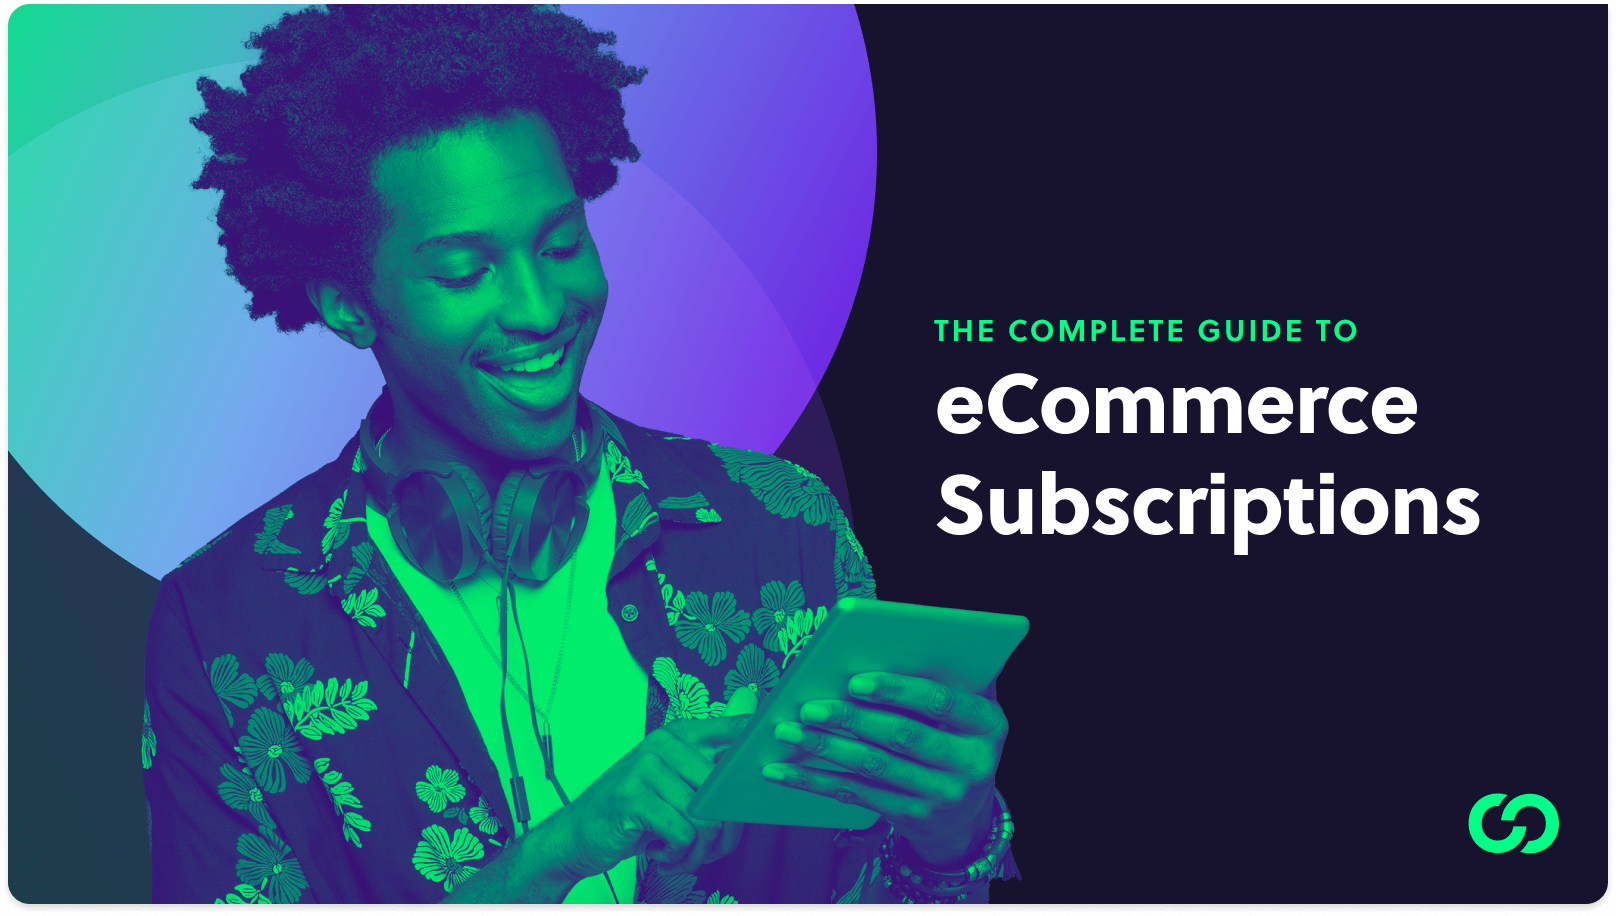 The Complete Guide to eCommerce Subscriptions